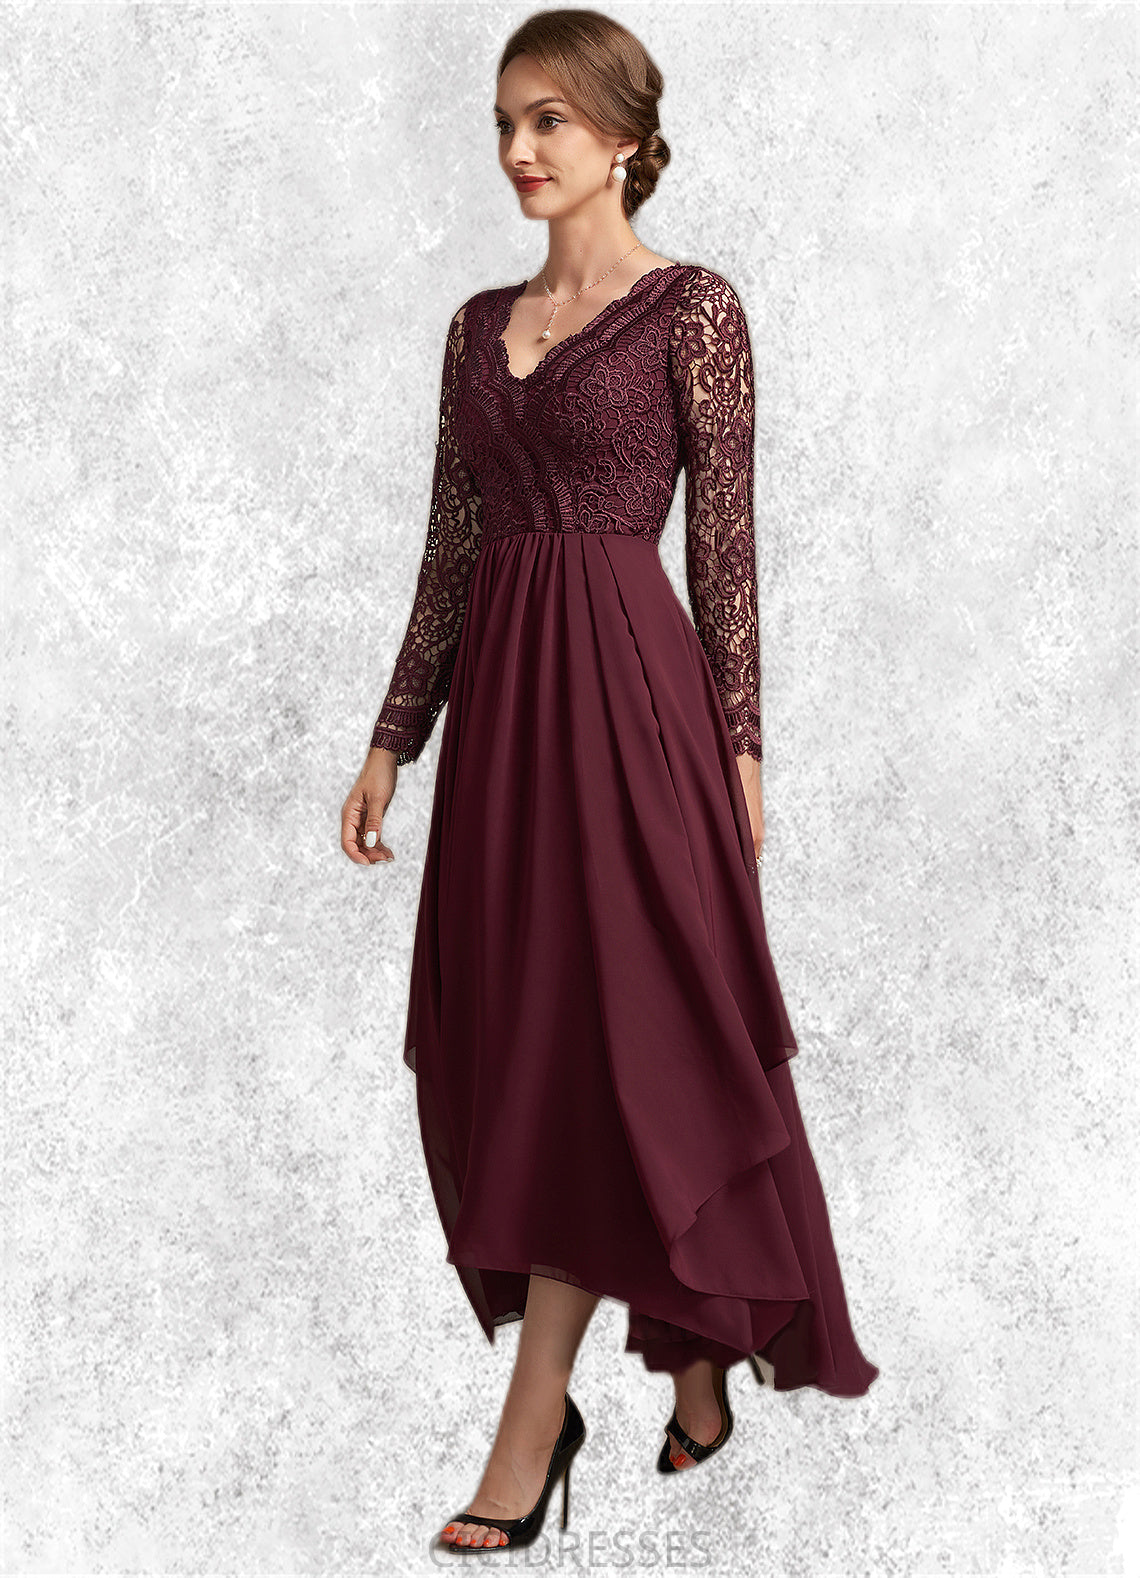 Maureen A-line V-Neck Asymmetrical Chiffon Lace Mother of the Bride Dress CIC8126P0014640